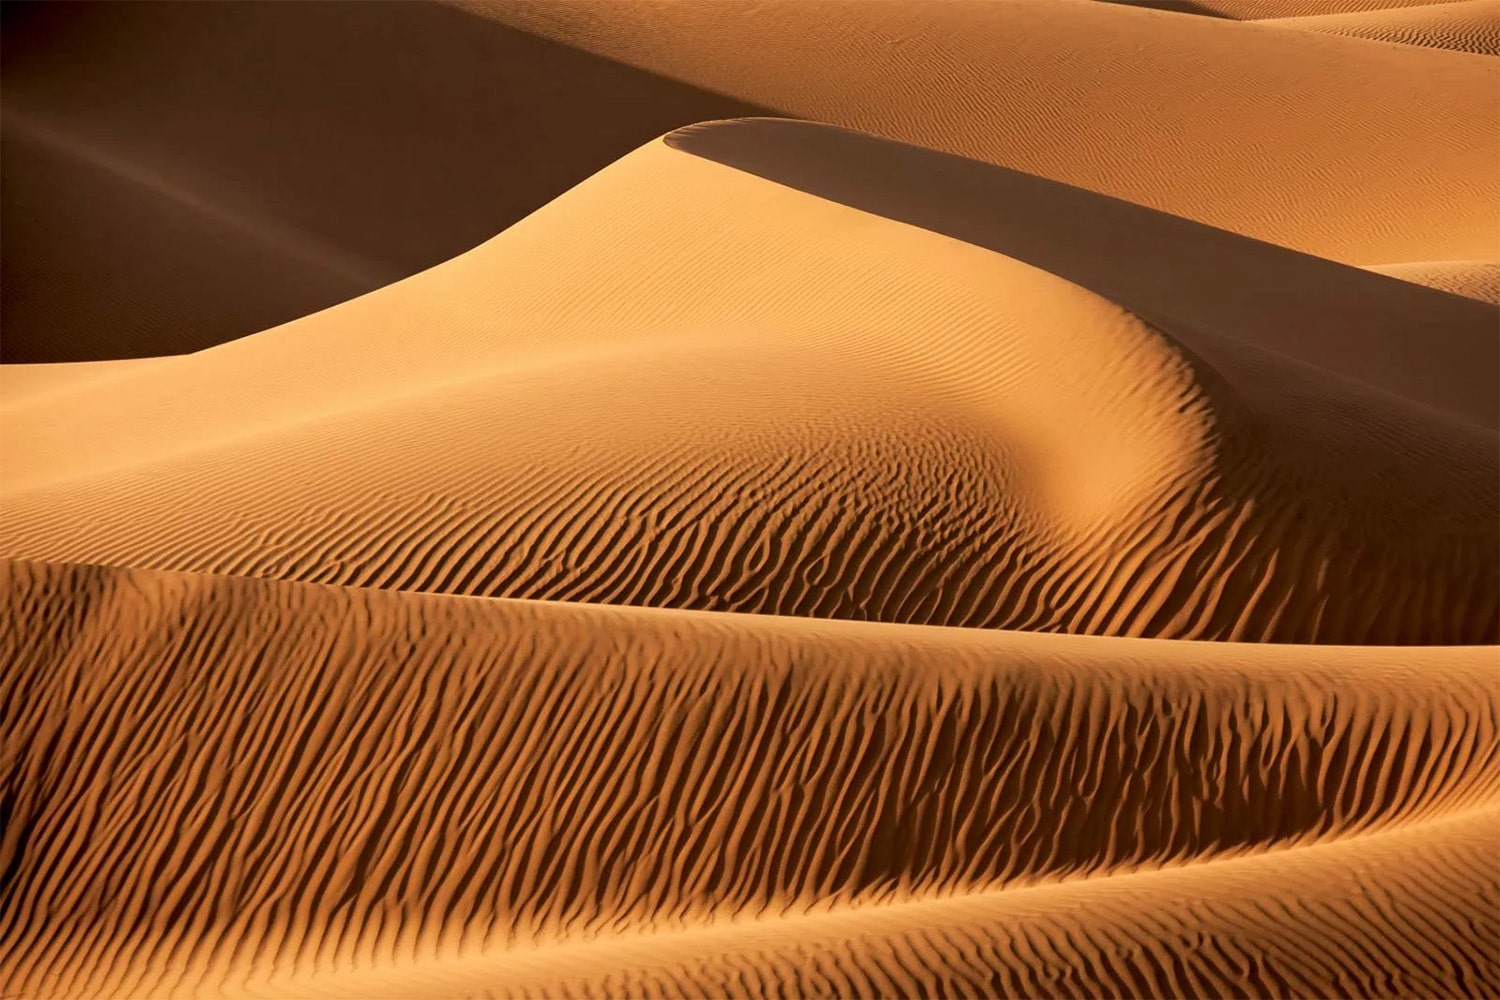 25 interesting facts about Sand dunes